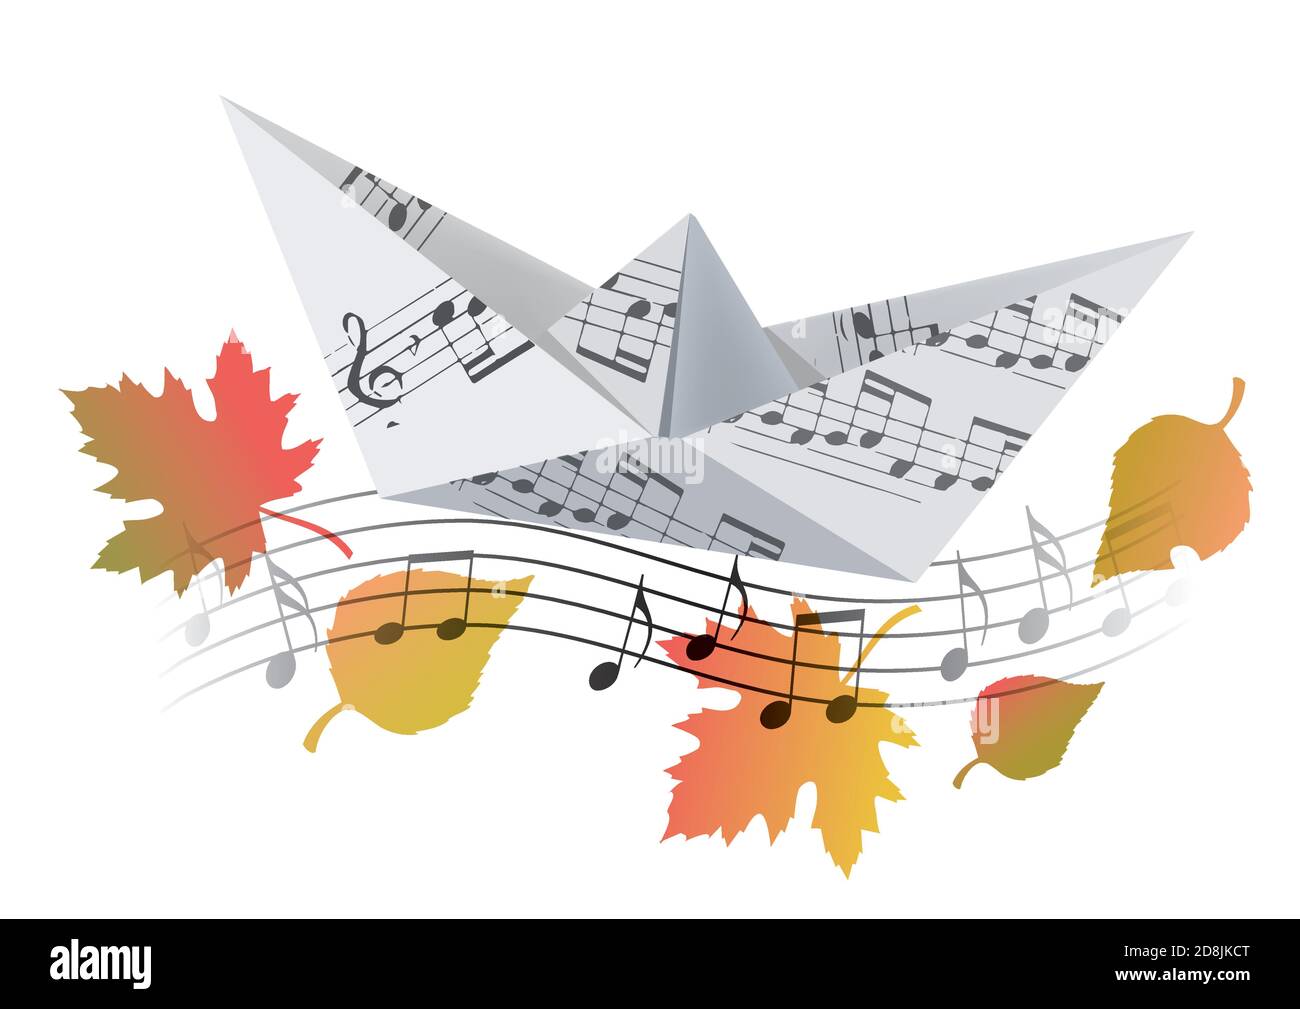 Origami boat with musical notes and autumn leaves.  Illustration of paper model of boat with music notes symbolizing autumn song. Vector available. Stock Vector